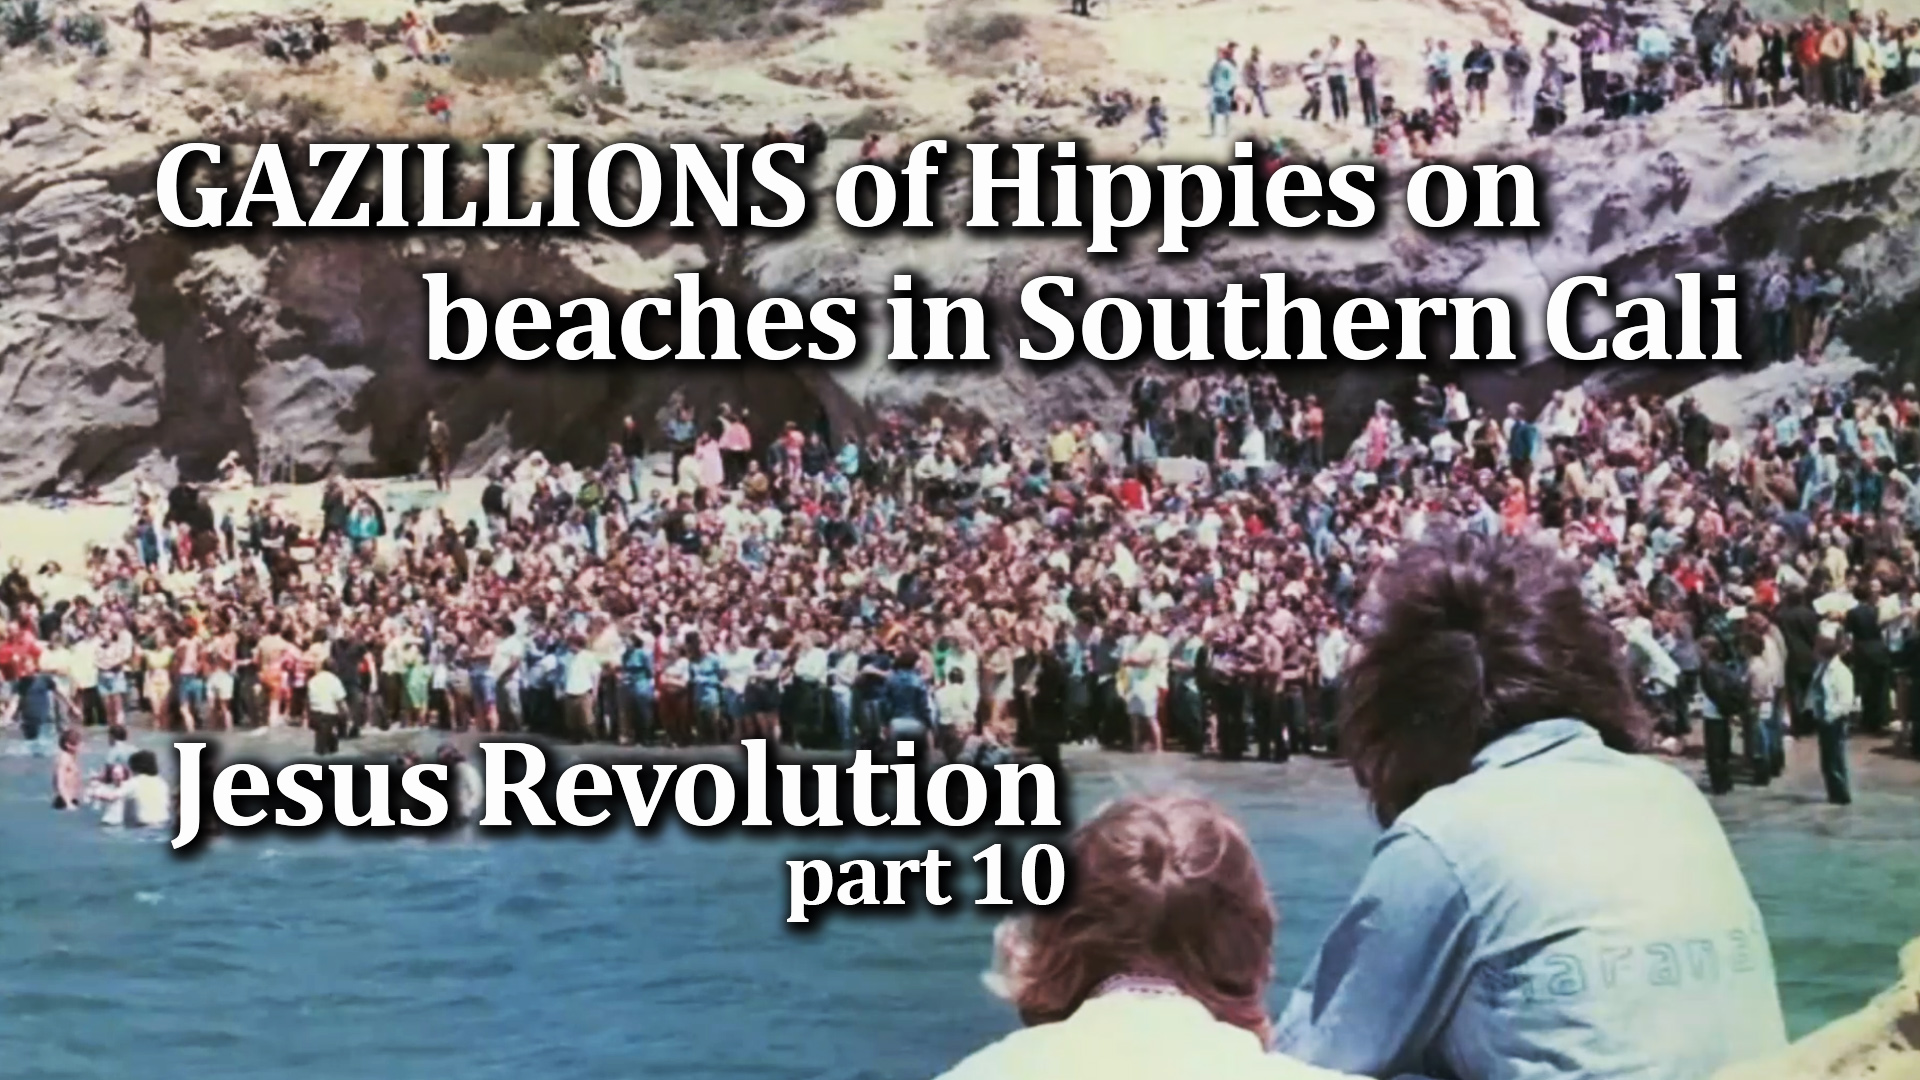 12-14-21 38 GAZILLIONS of hippies on beaches in Southern California